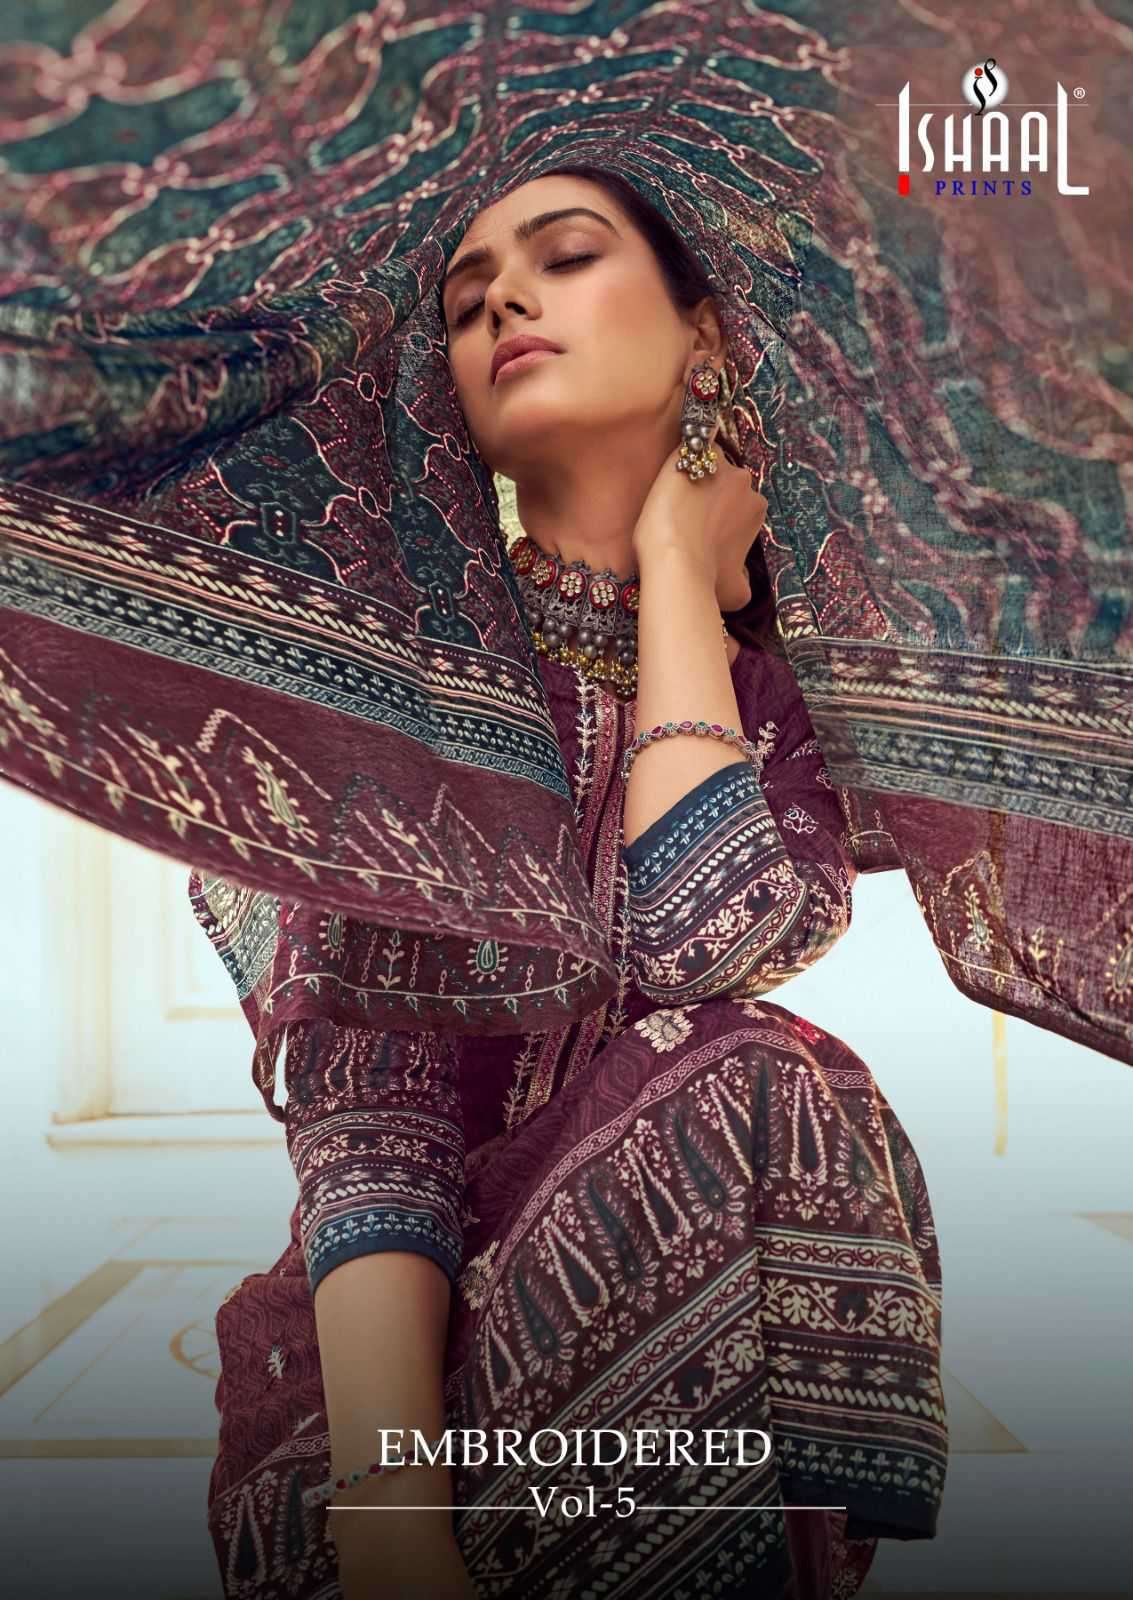 Ishaal Embroidered Vol 5 Exclusive Fancy Lawn Cotton Branded Suits Online Dealers